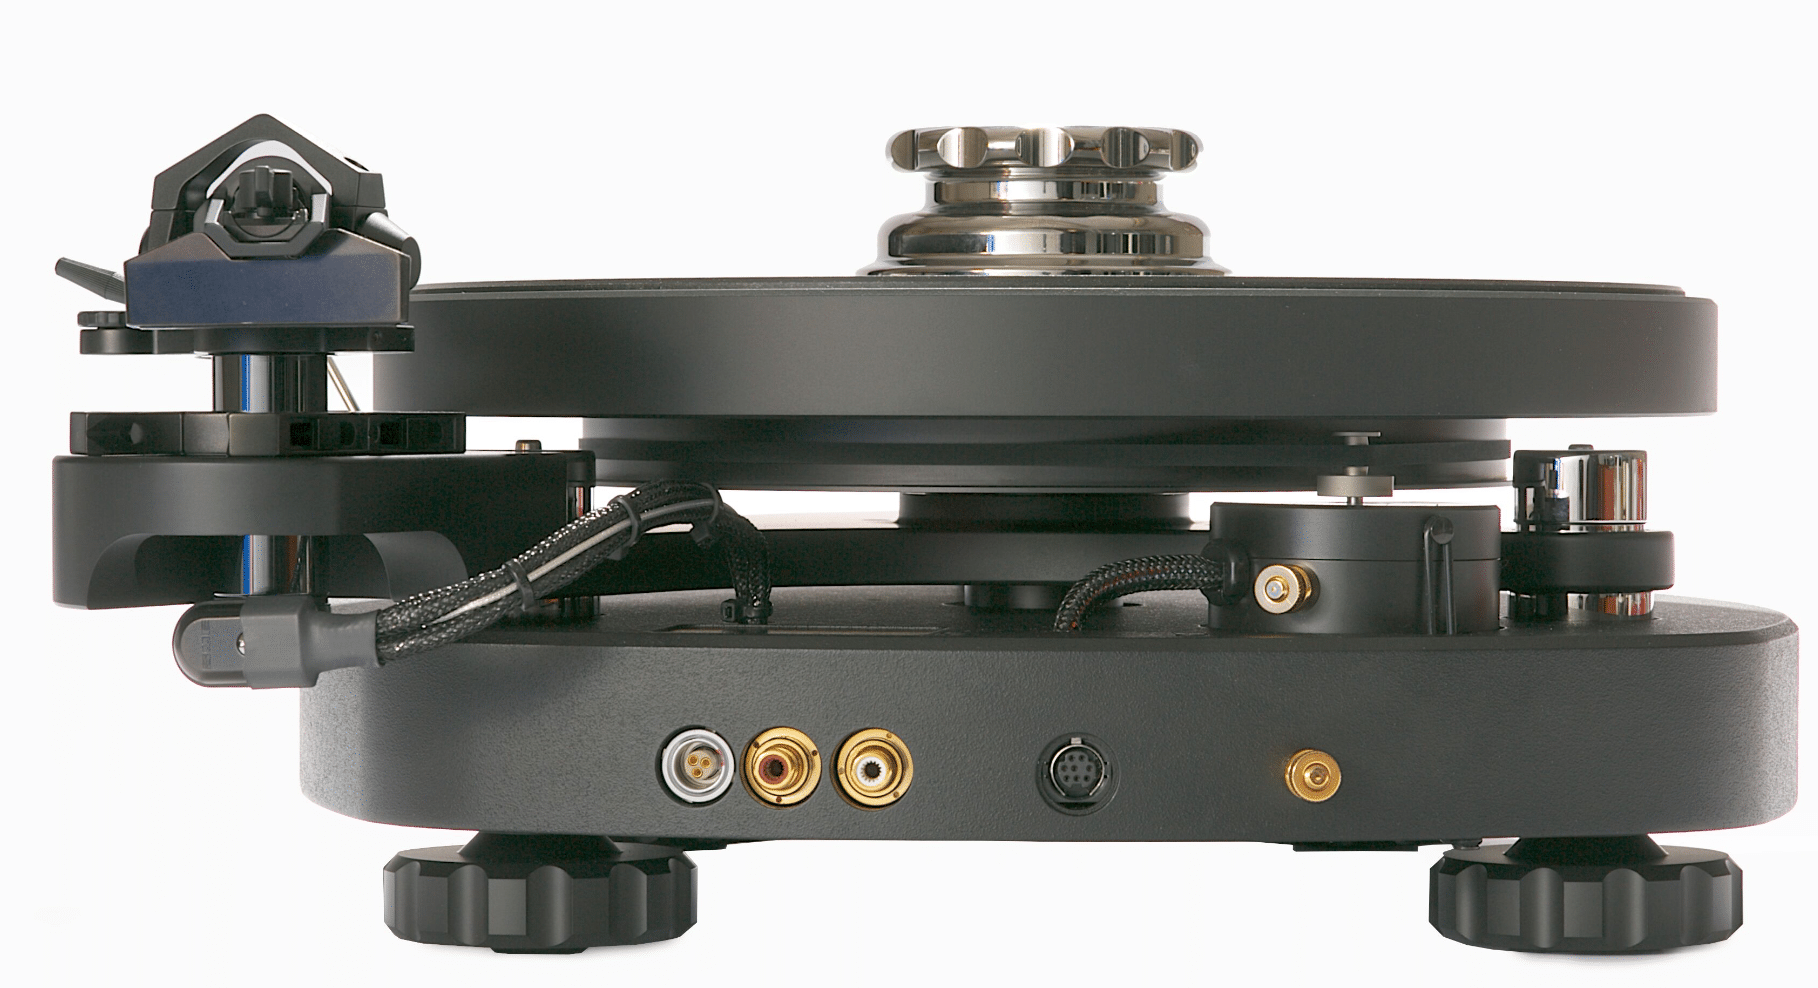 Synergy integrated turntable From SME